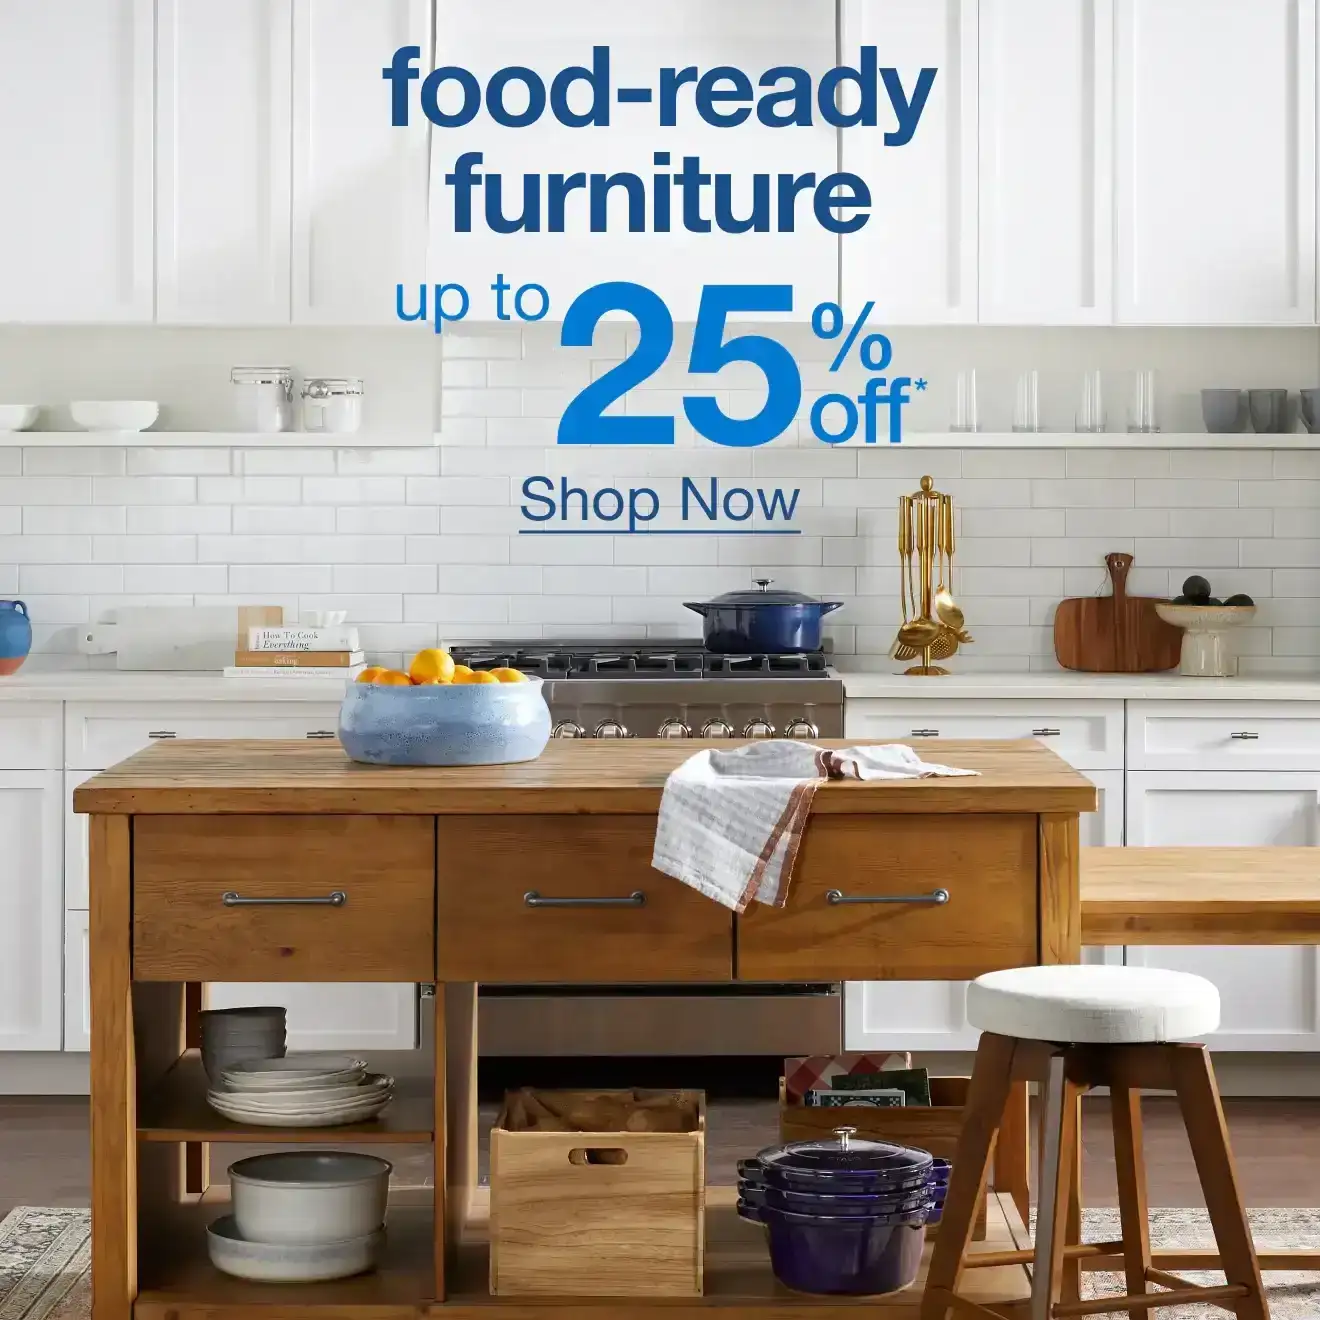 Up to 25% off Food-Ready Furniture - Shop Now!